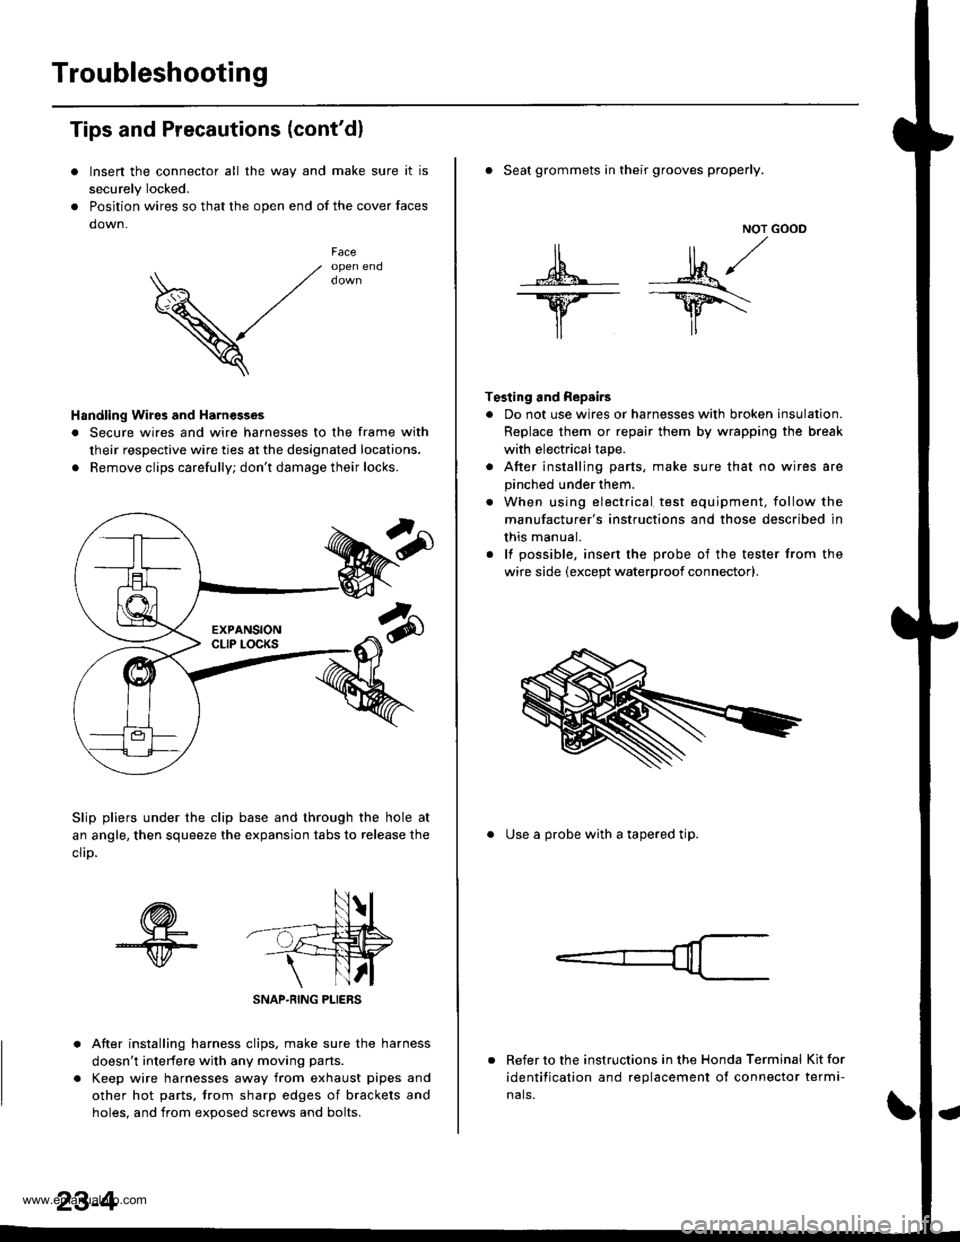 HONDA CR-V 1998 RD1-RD3 / 1.G Workshop Manual 
Troubleshooting
Tips and Precautions (contdl
Insen the connector all the way and make sure it is
securely Iocked.
Position wires so that the open end of the cover faces
down.
V
Faceopen end
Handling